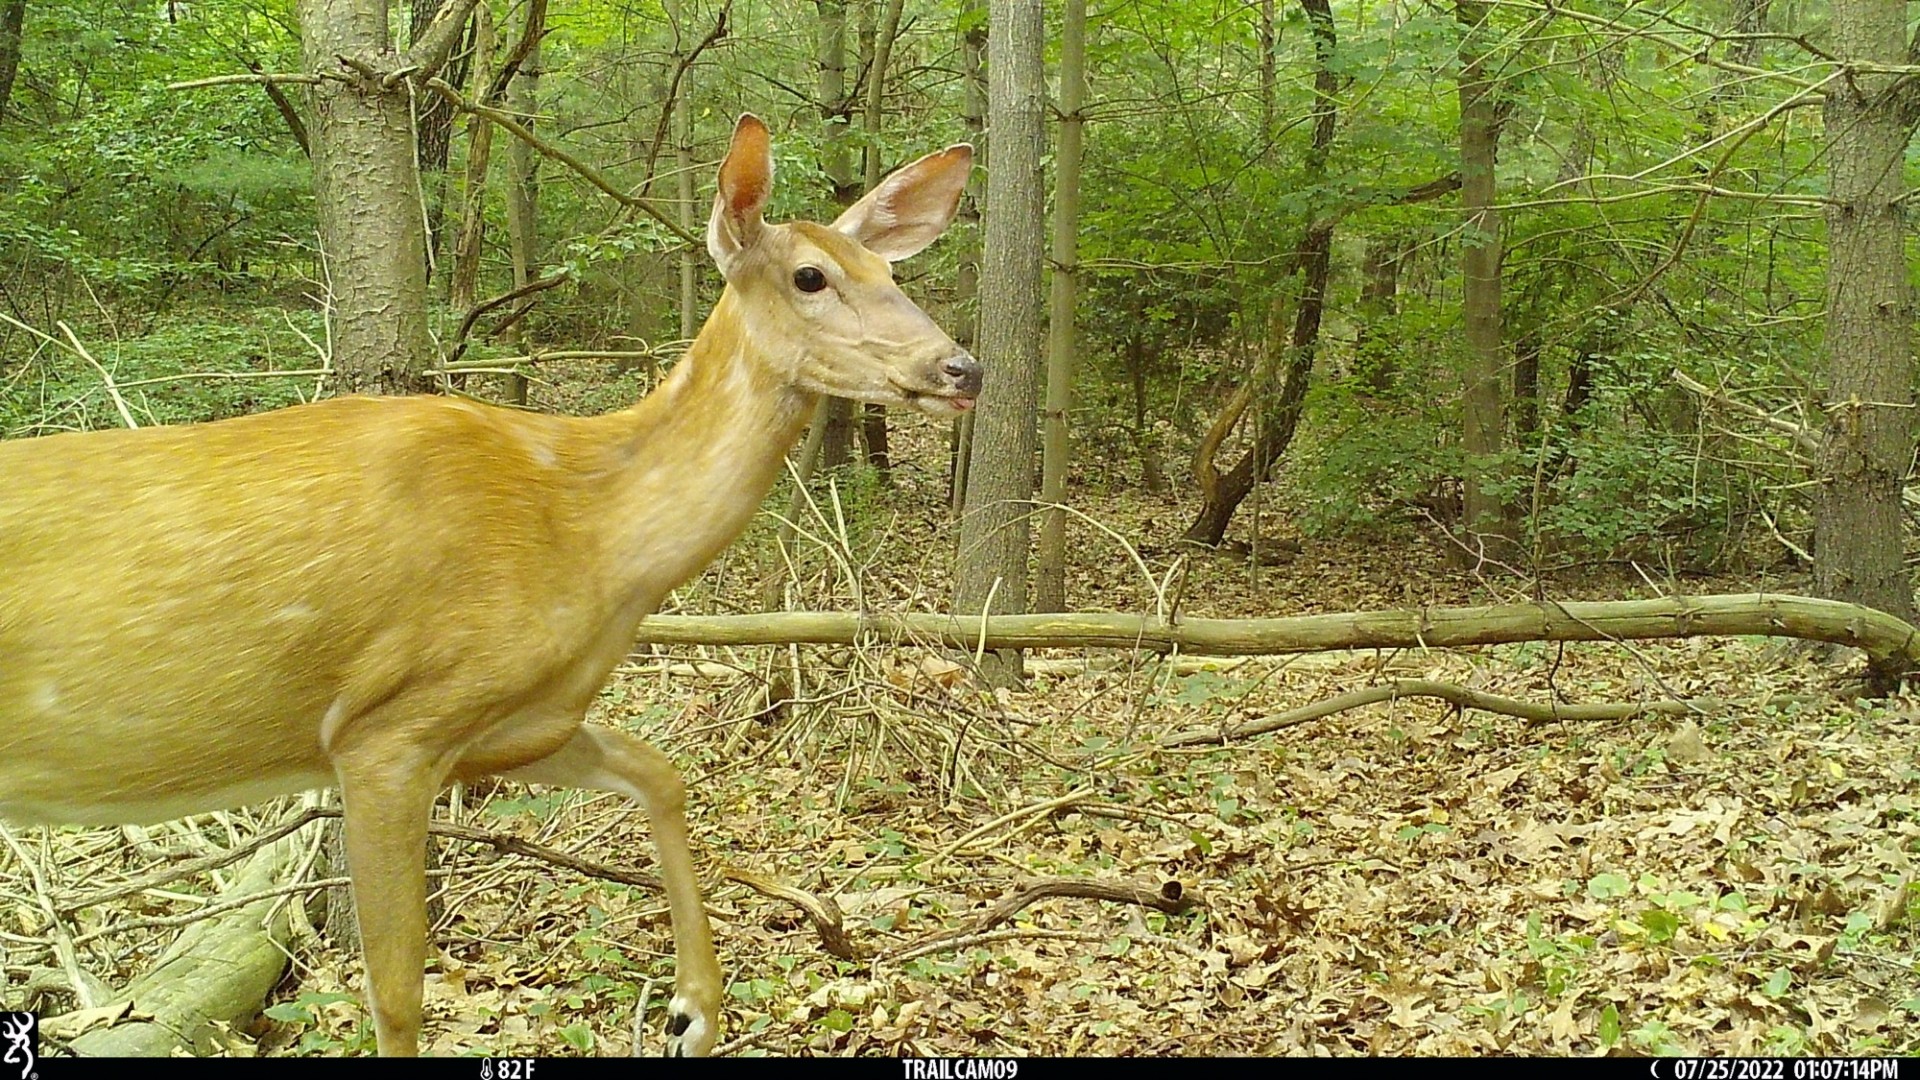 Trail camera photo of a deer in the woods.